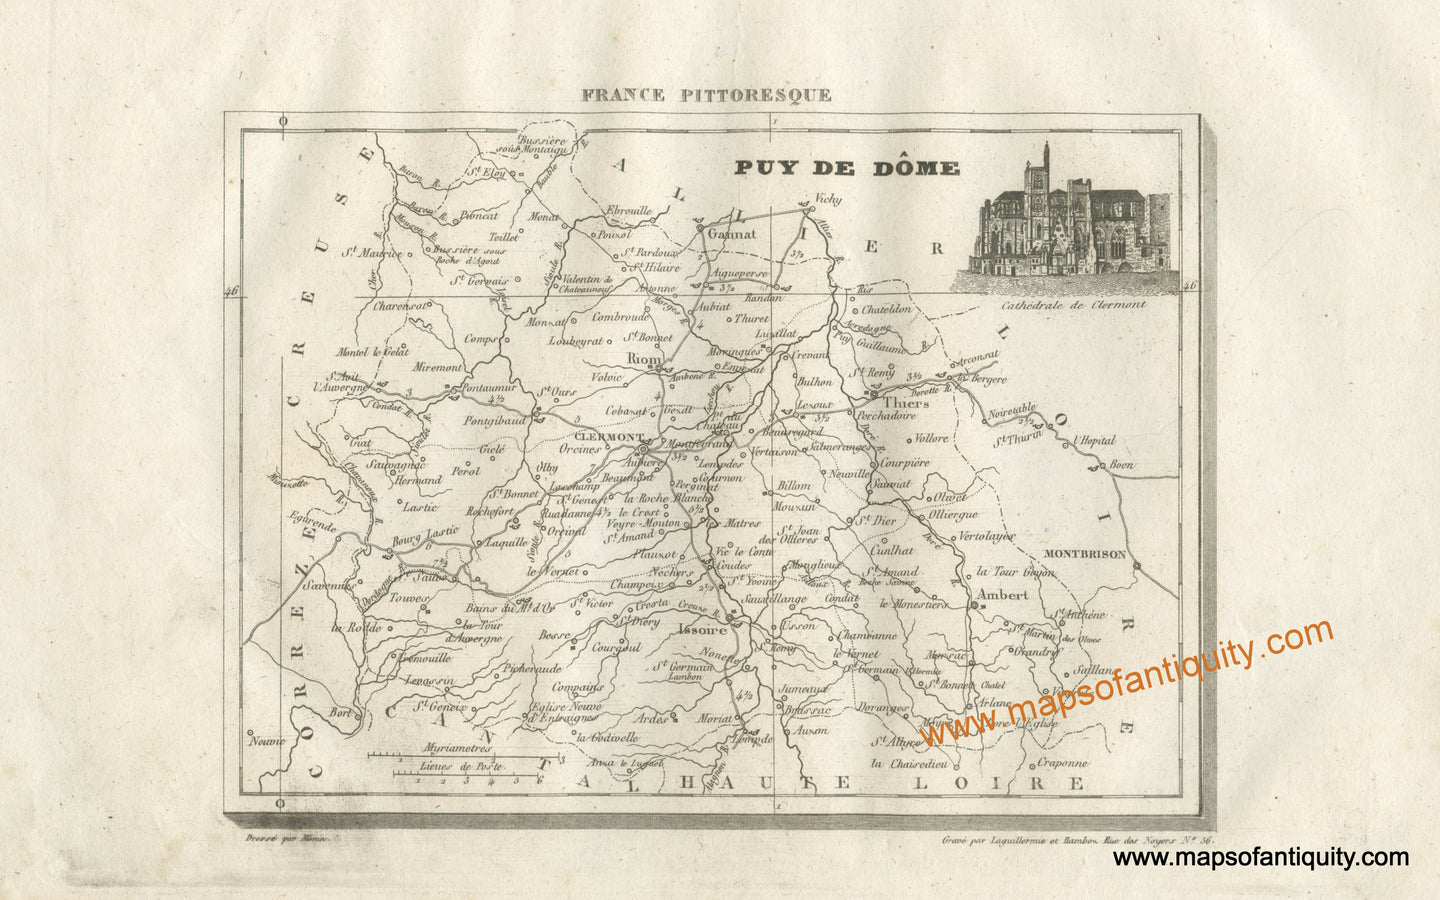 Antique-Black-and-White-Map-France-Puy-de-Dome-including-the-cities-of-Riom-Clermont-and-Issoire-Europe-France-1835-Monin-Maps-Of-Antiquity